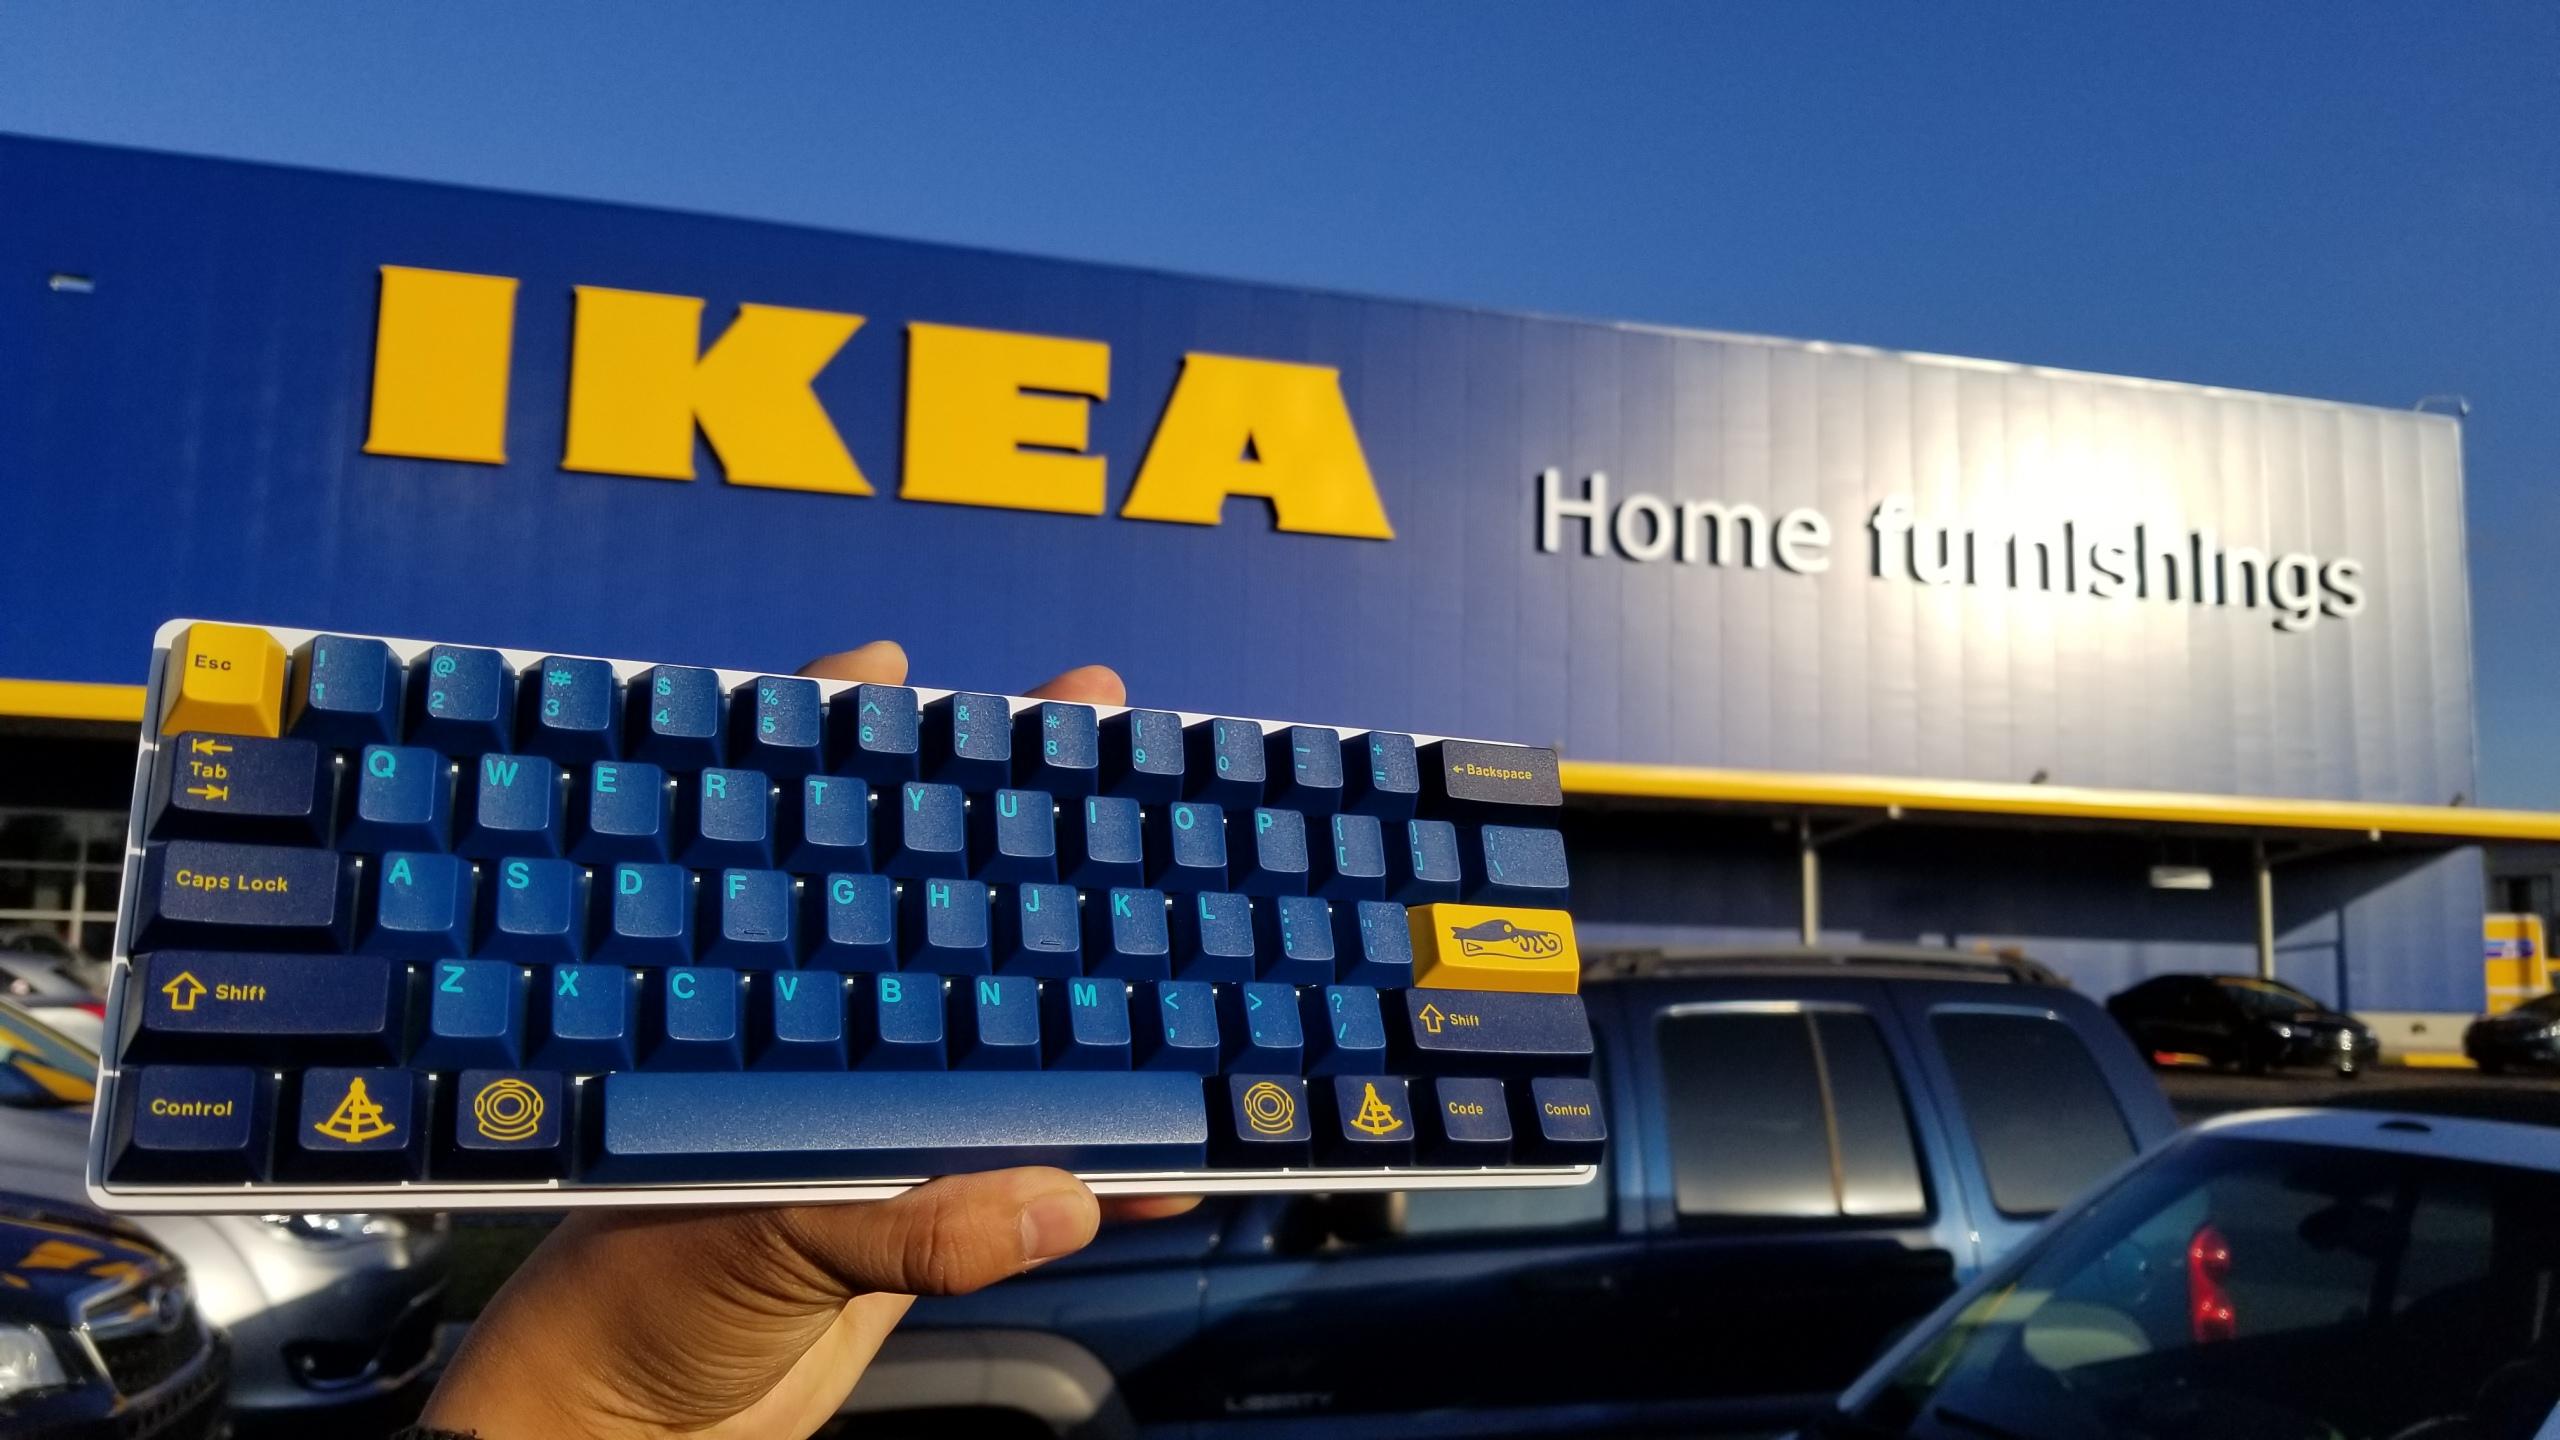 GMK Ikea keycaps on a keyboard with an Ikea store on the background